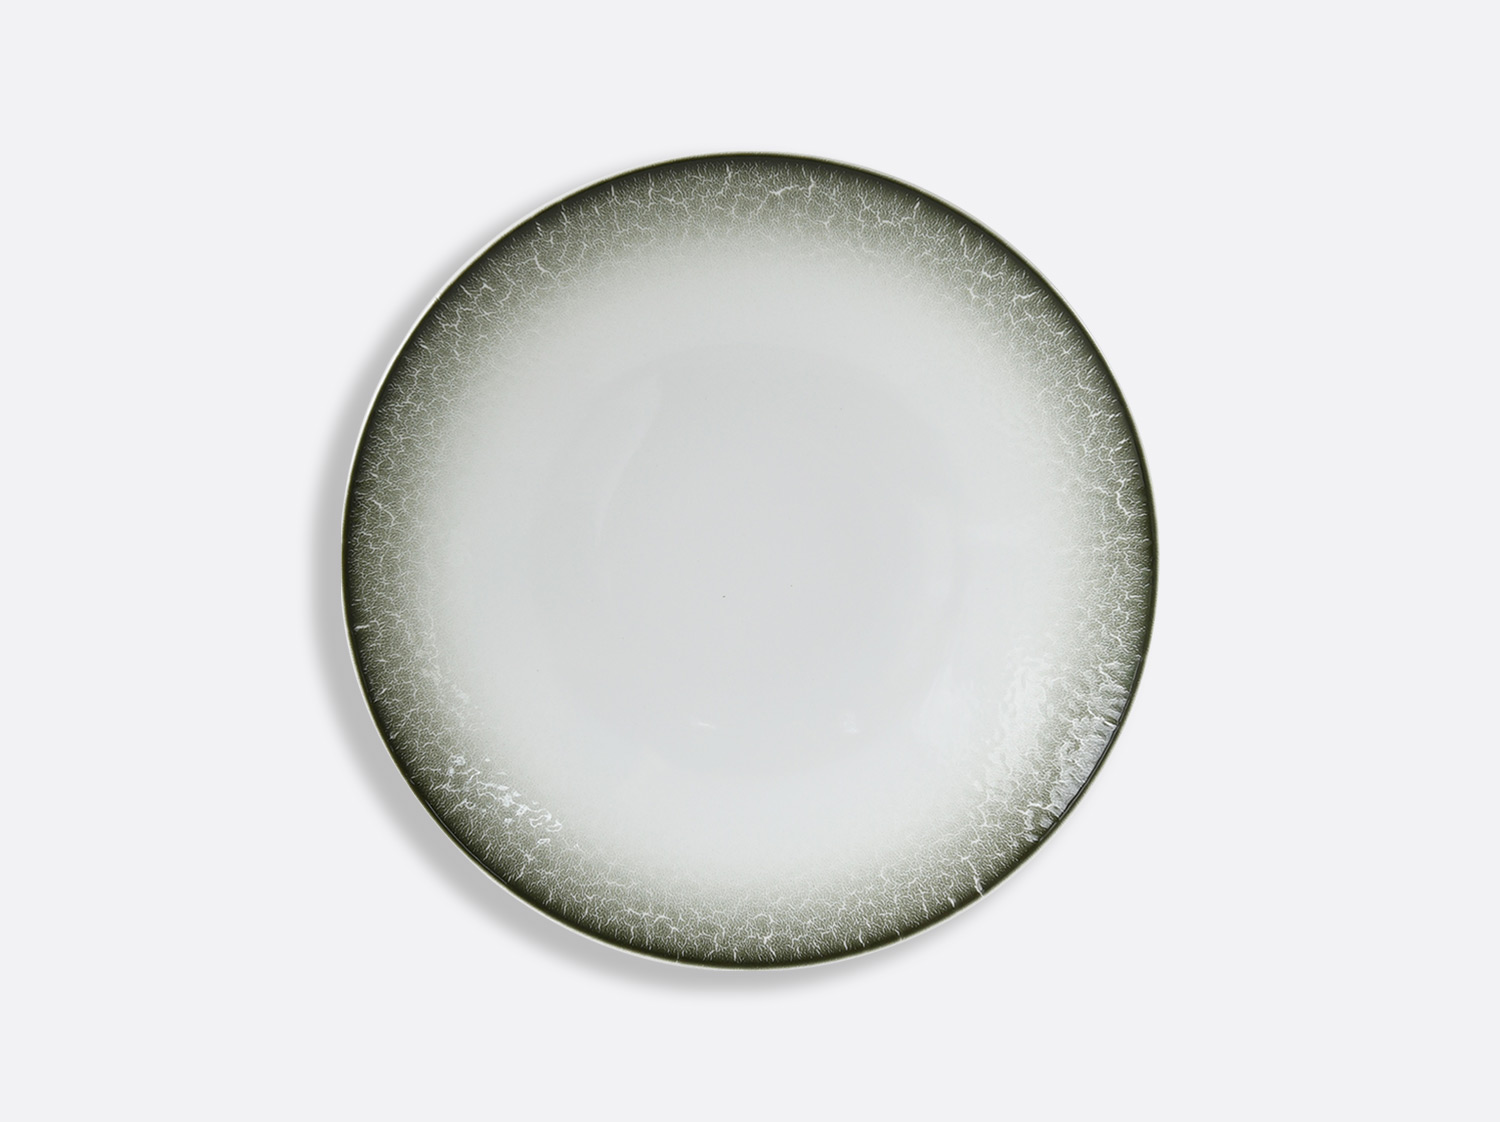 China Coupe plate 9.1" of the collection TERRA LICHEN | Bernardaud